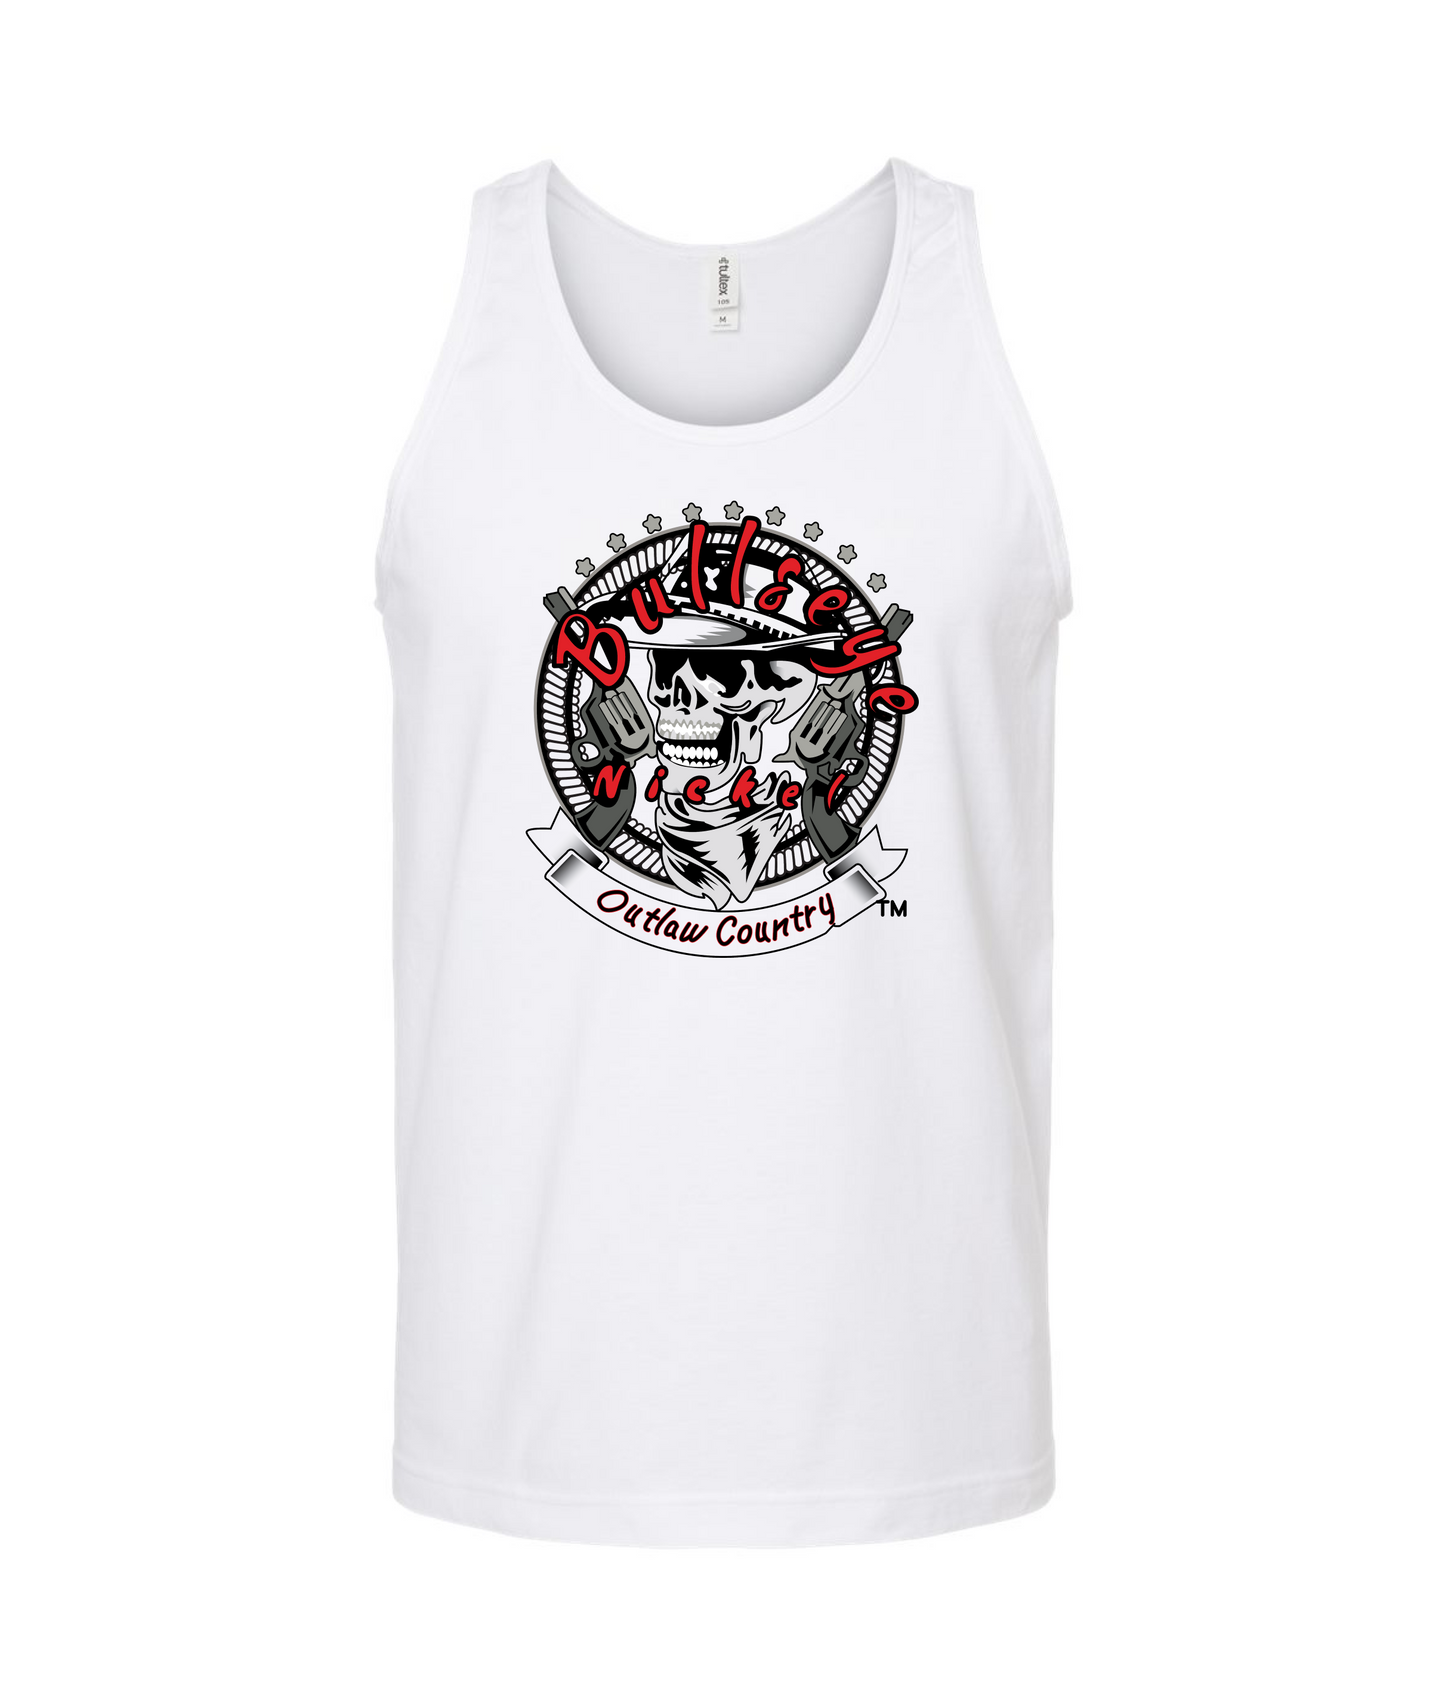 Bullseye Nickel Band - Outlaw Country - White Tank Top